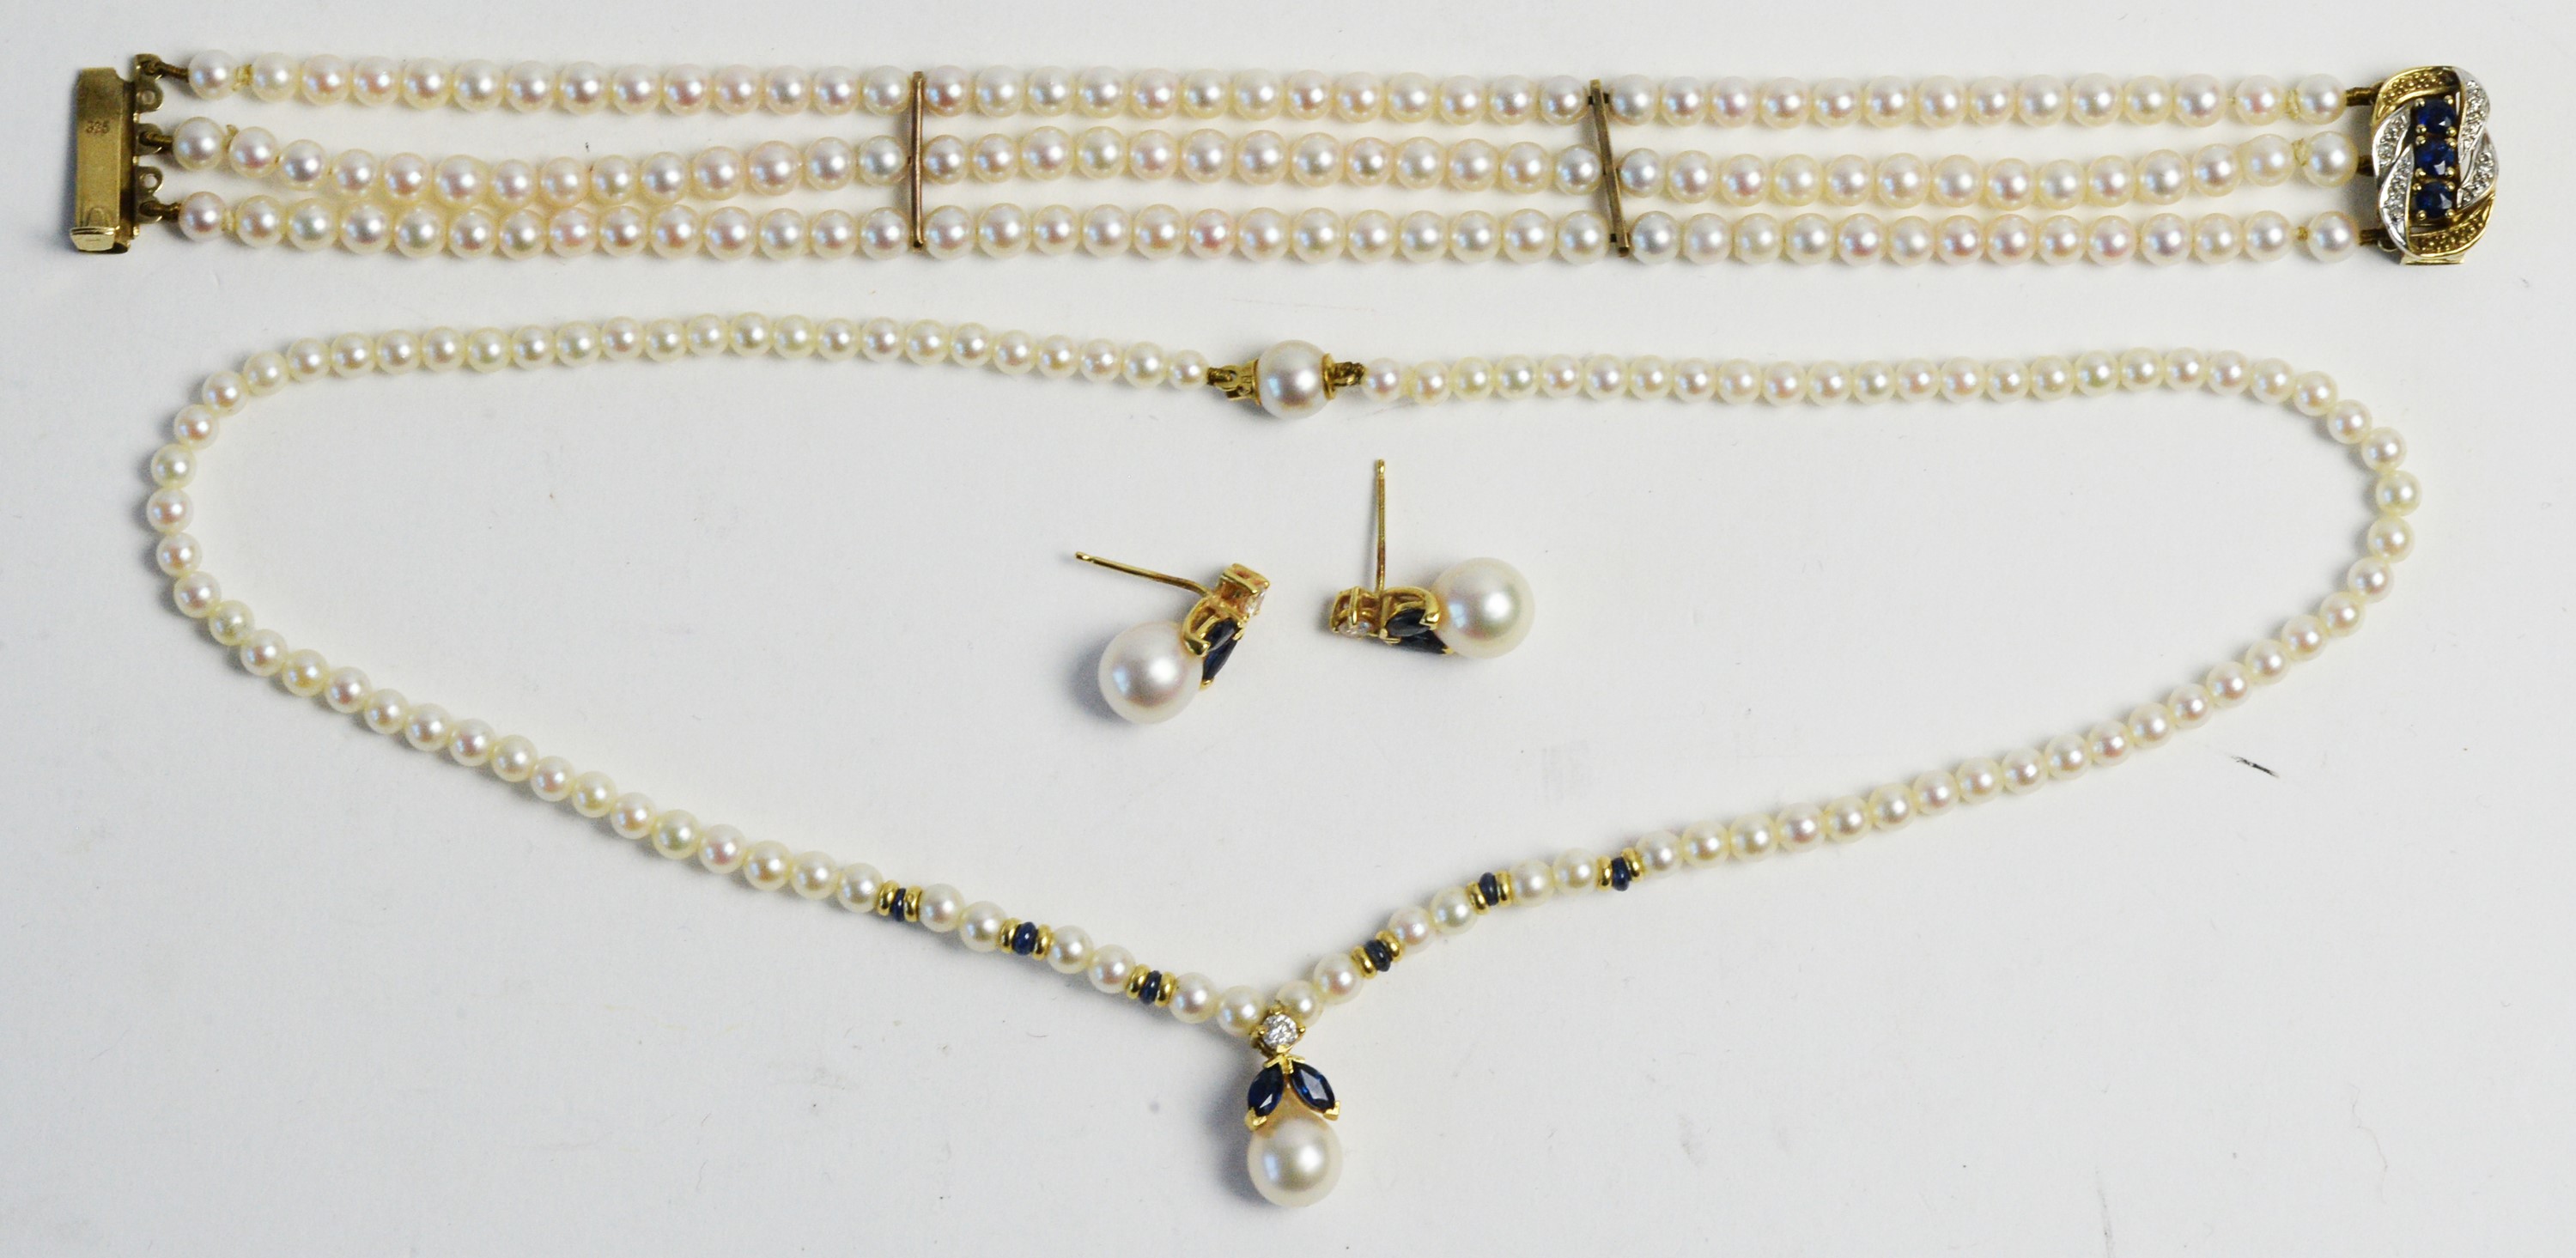 Pearl, diamond and sapphire necklace, bracelet and earrings - Image 6 of 6